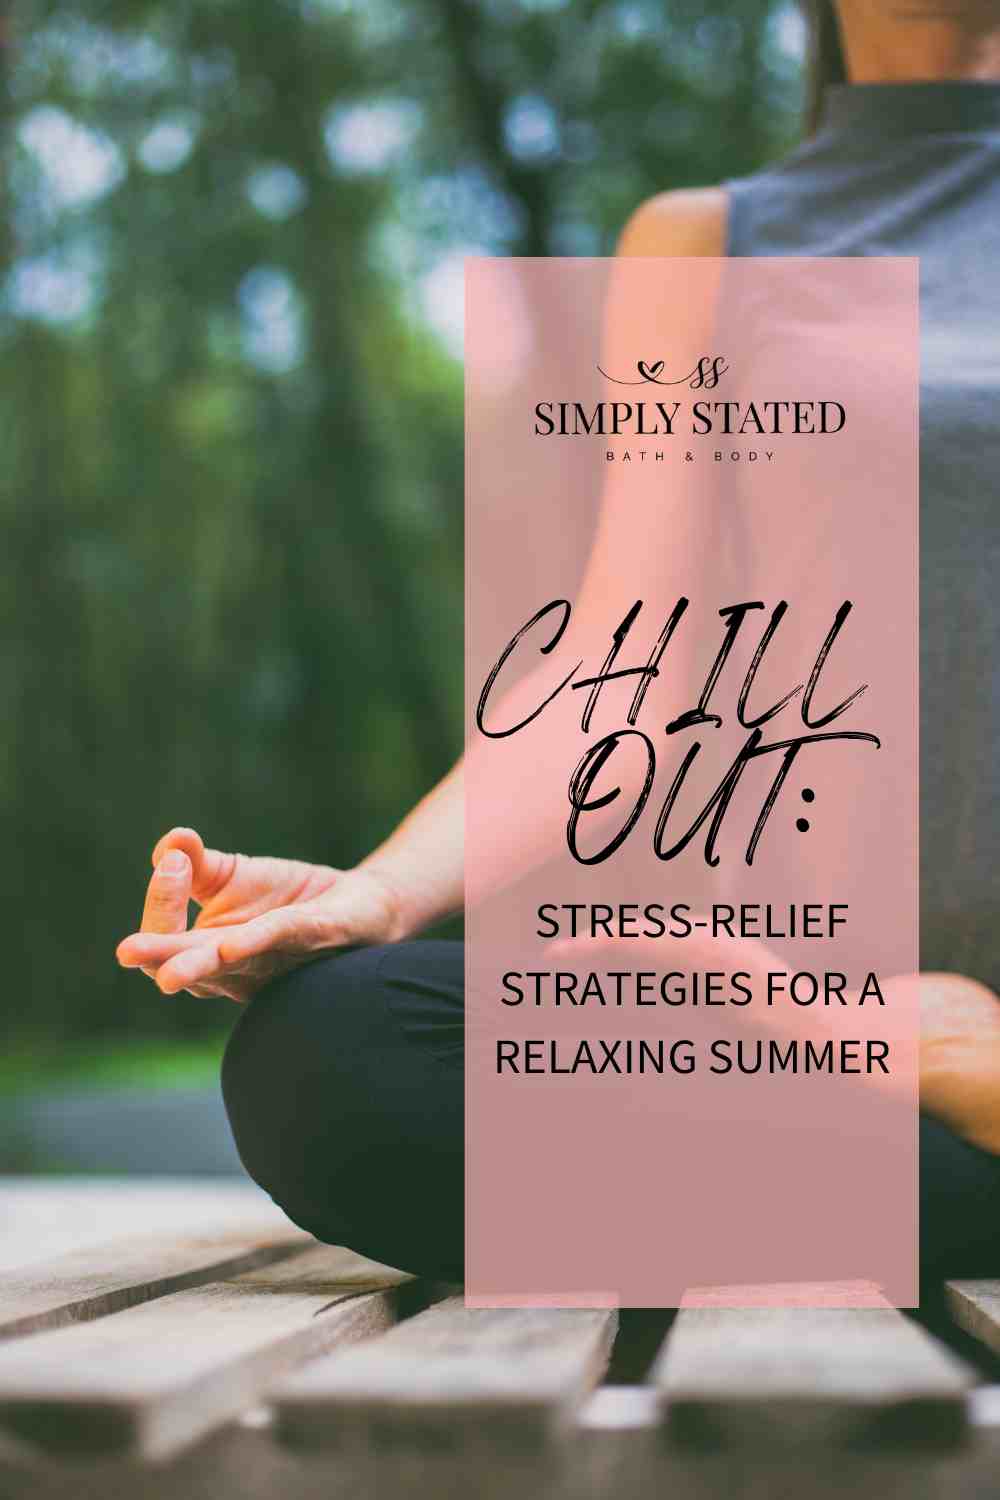 Chill Out: Stress-Relief Strategies for a Relaxing Summer